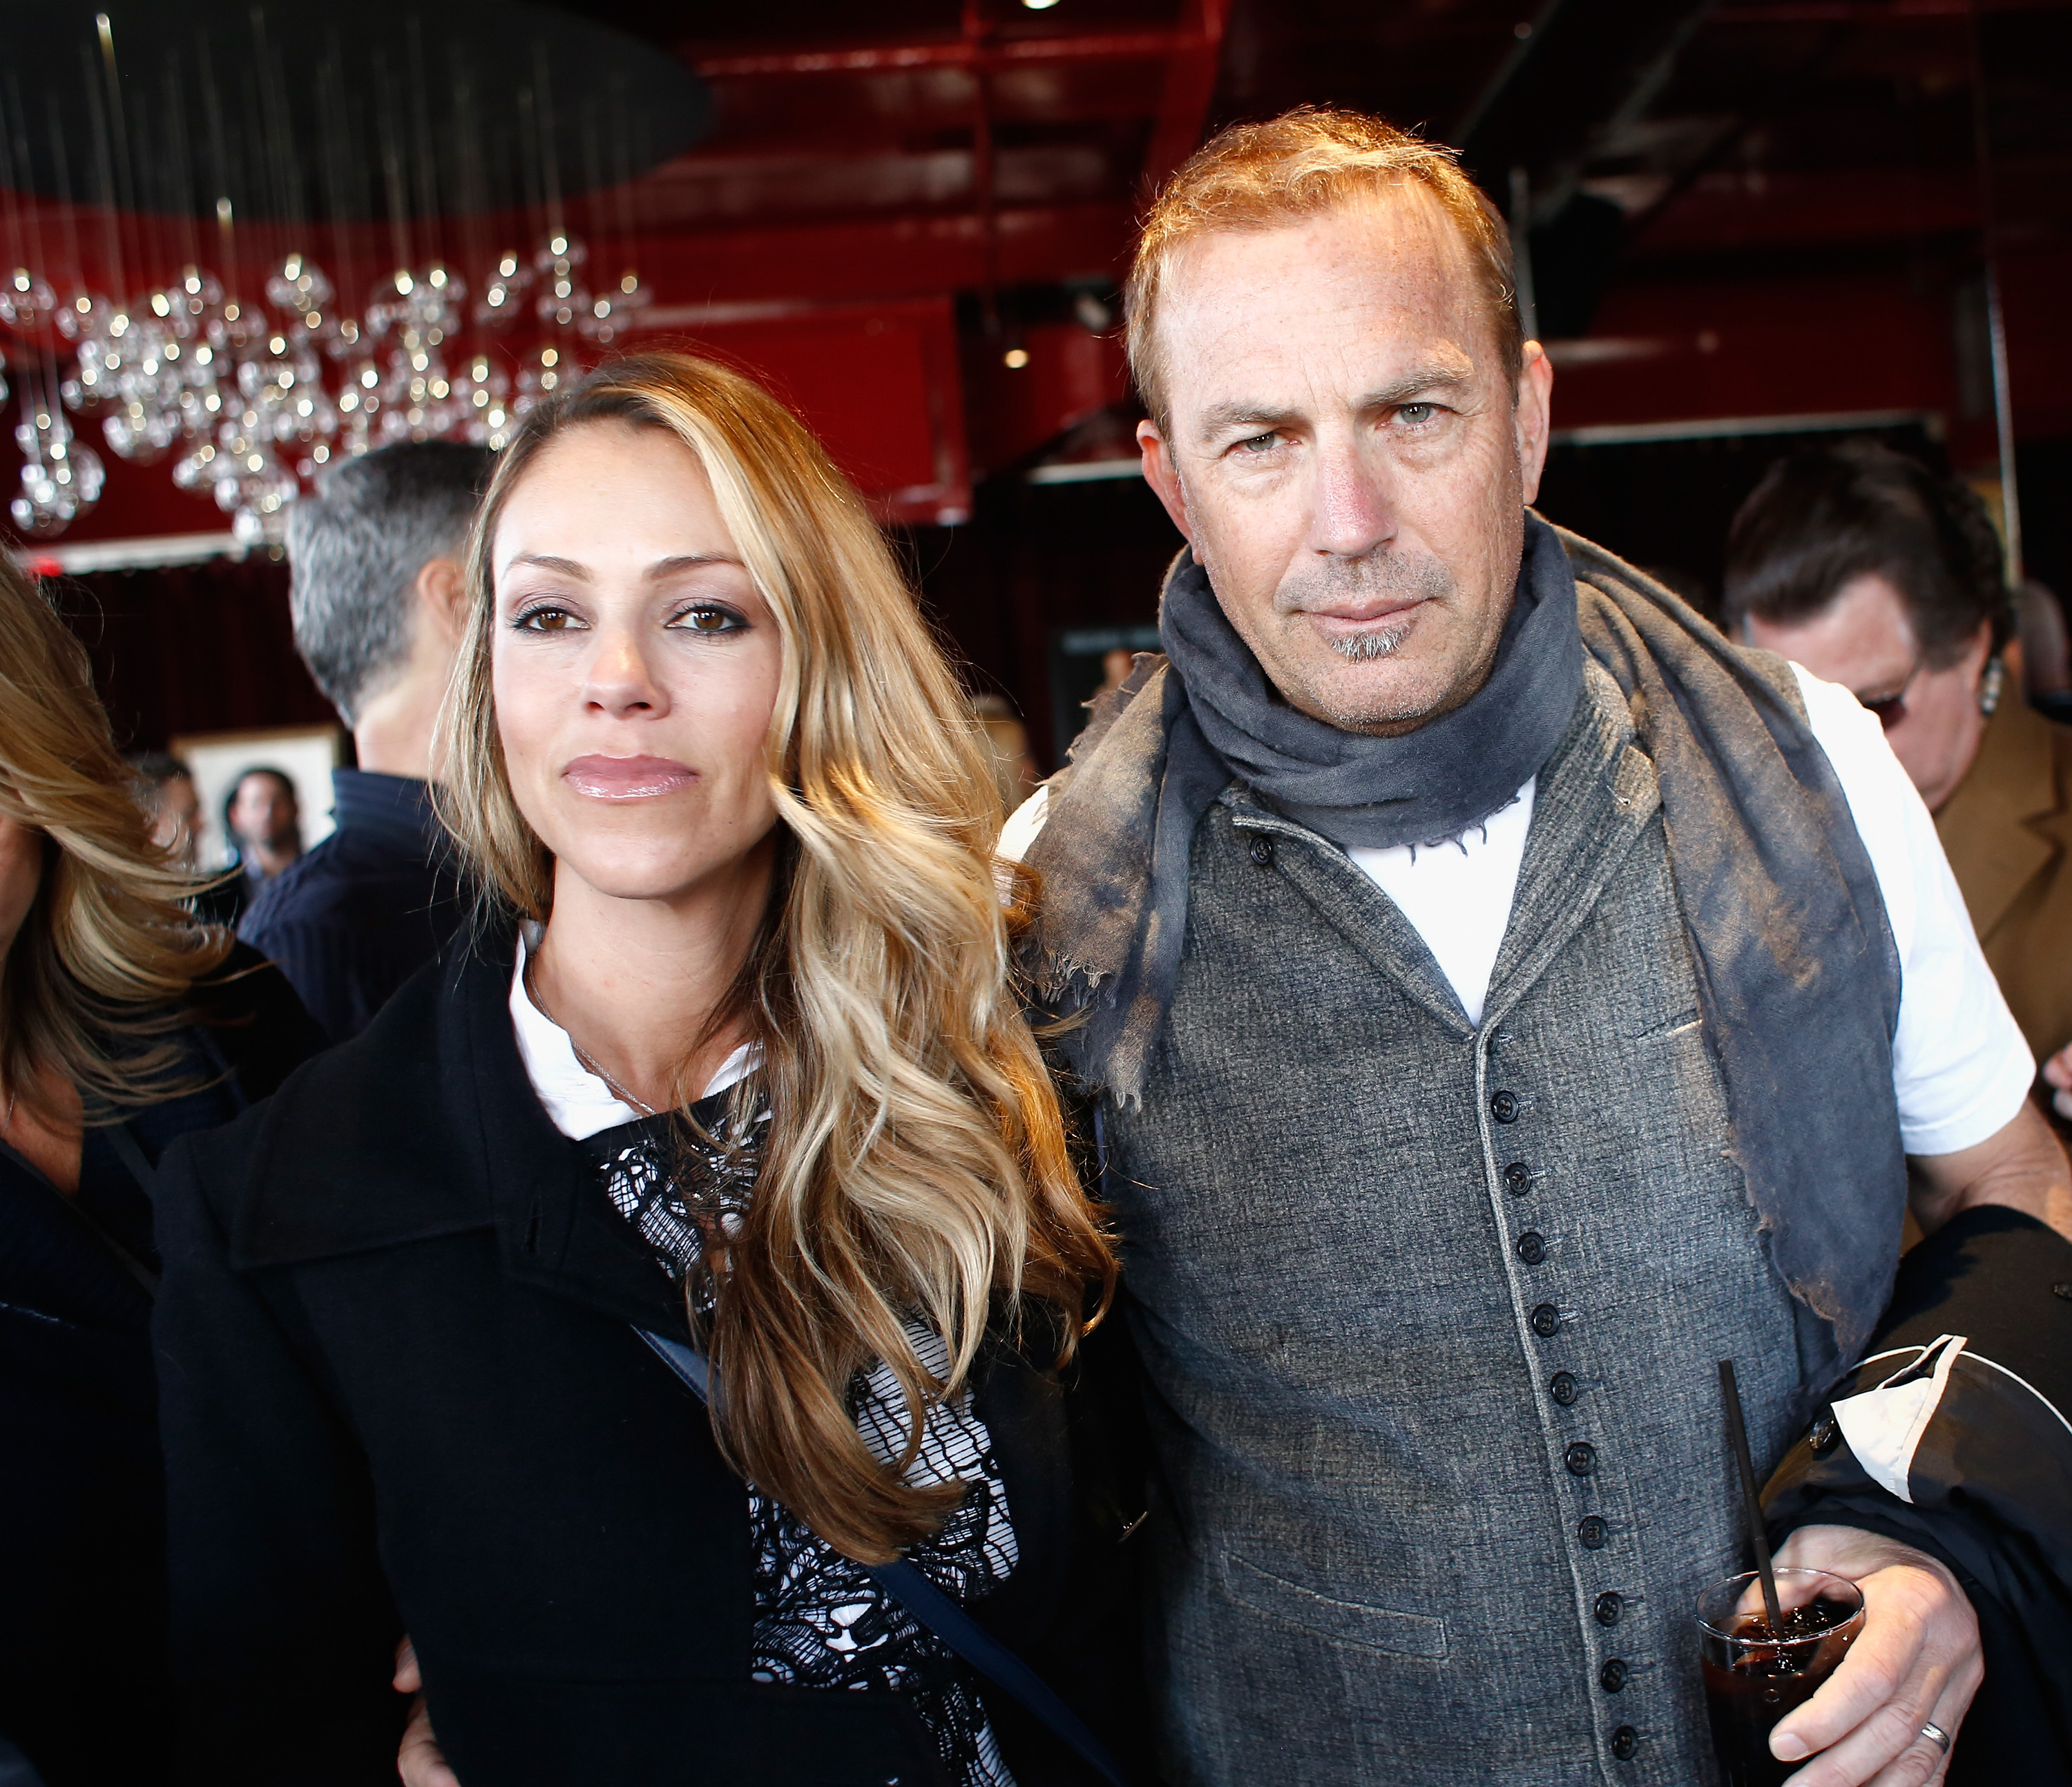 Christine Baumgartner and Kevin Costner at 230 Fifth Avenue on February 1, 2014, in New York City. | Source: Getty Images